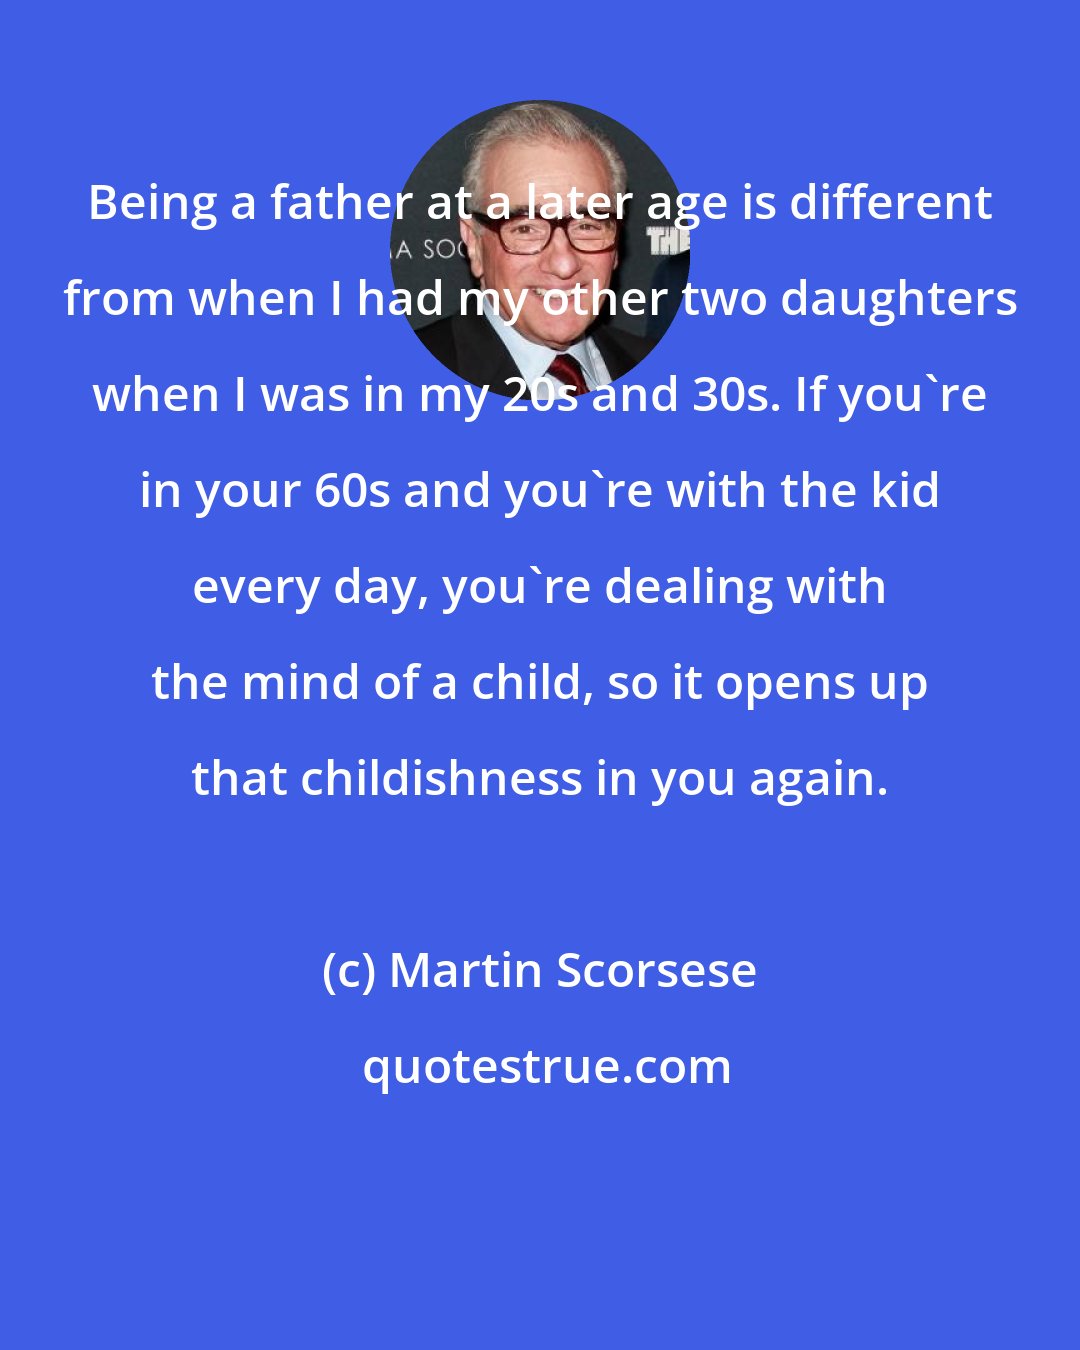 Martin Scorsese: Being a father at a later age is different from when I had my other two daughters when I was in my 20s and 30s. If you're in your 60s and you're with the kid every day, you're dealing with the mind of a child, so it opens up that childishness in you again.